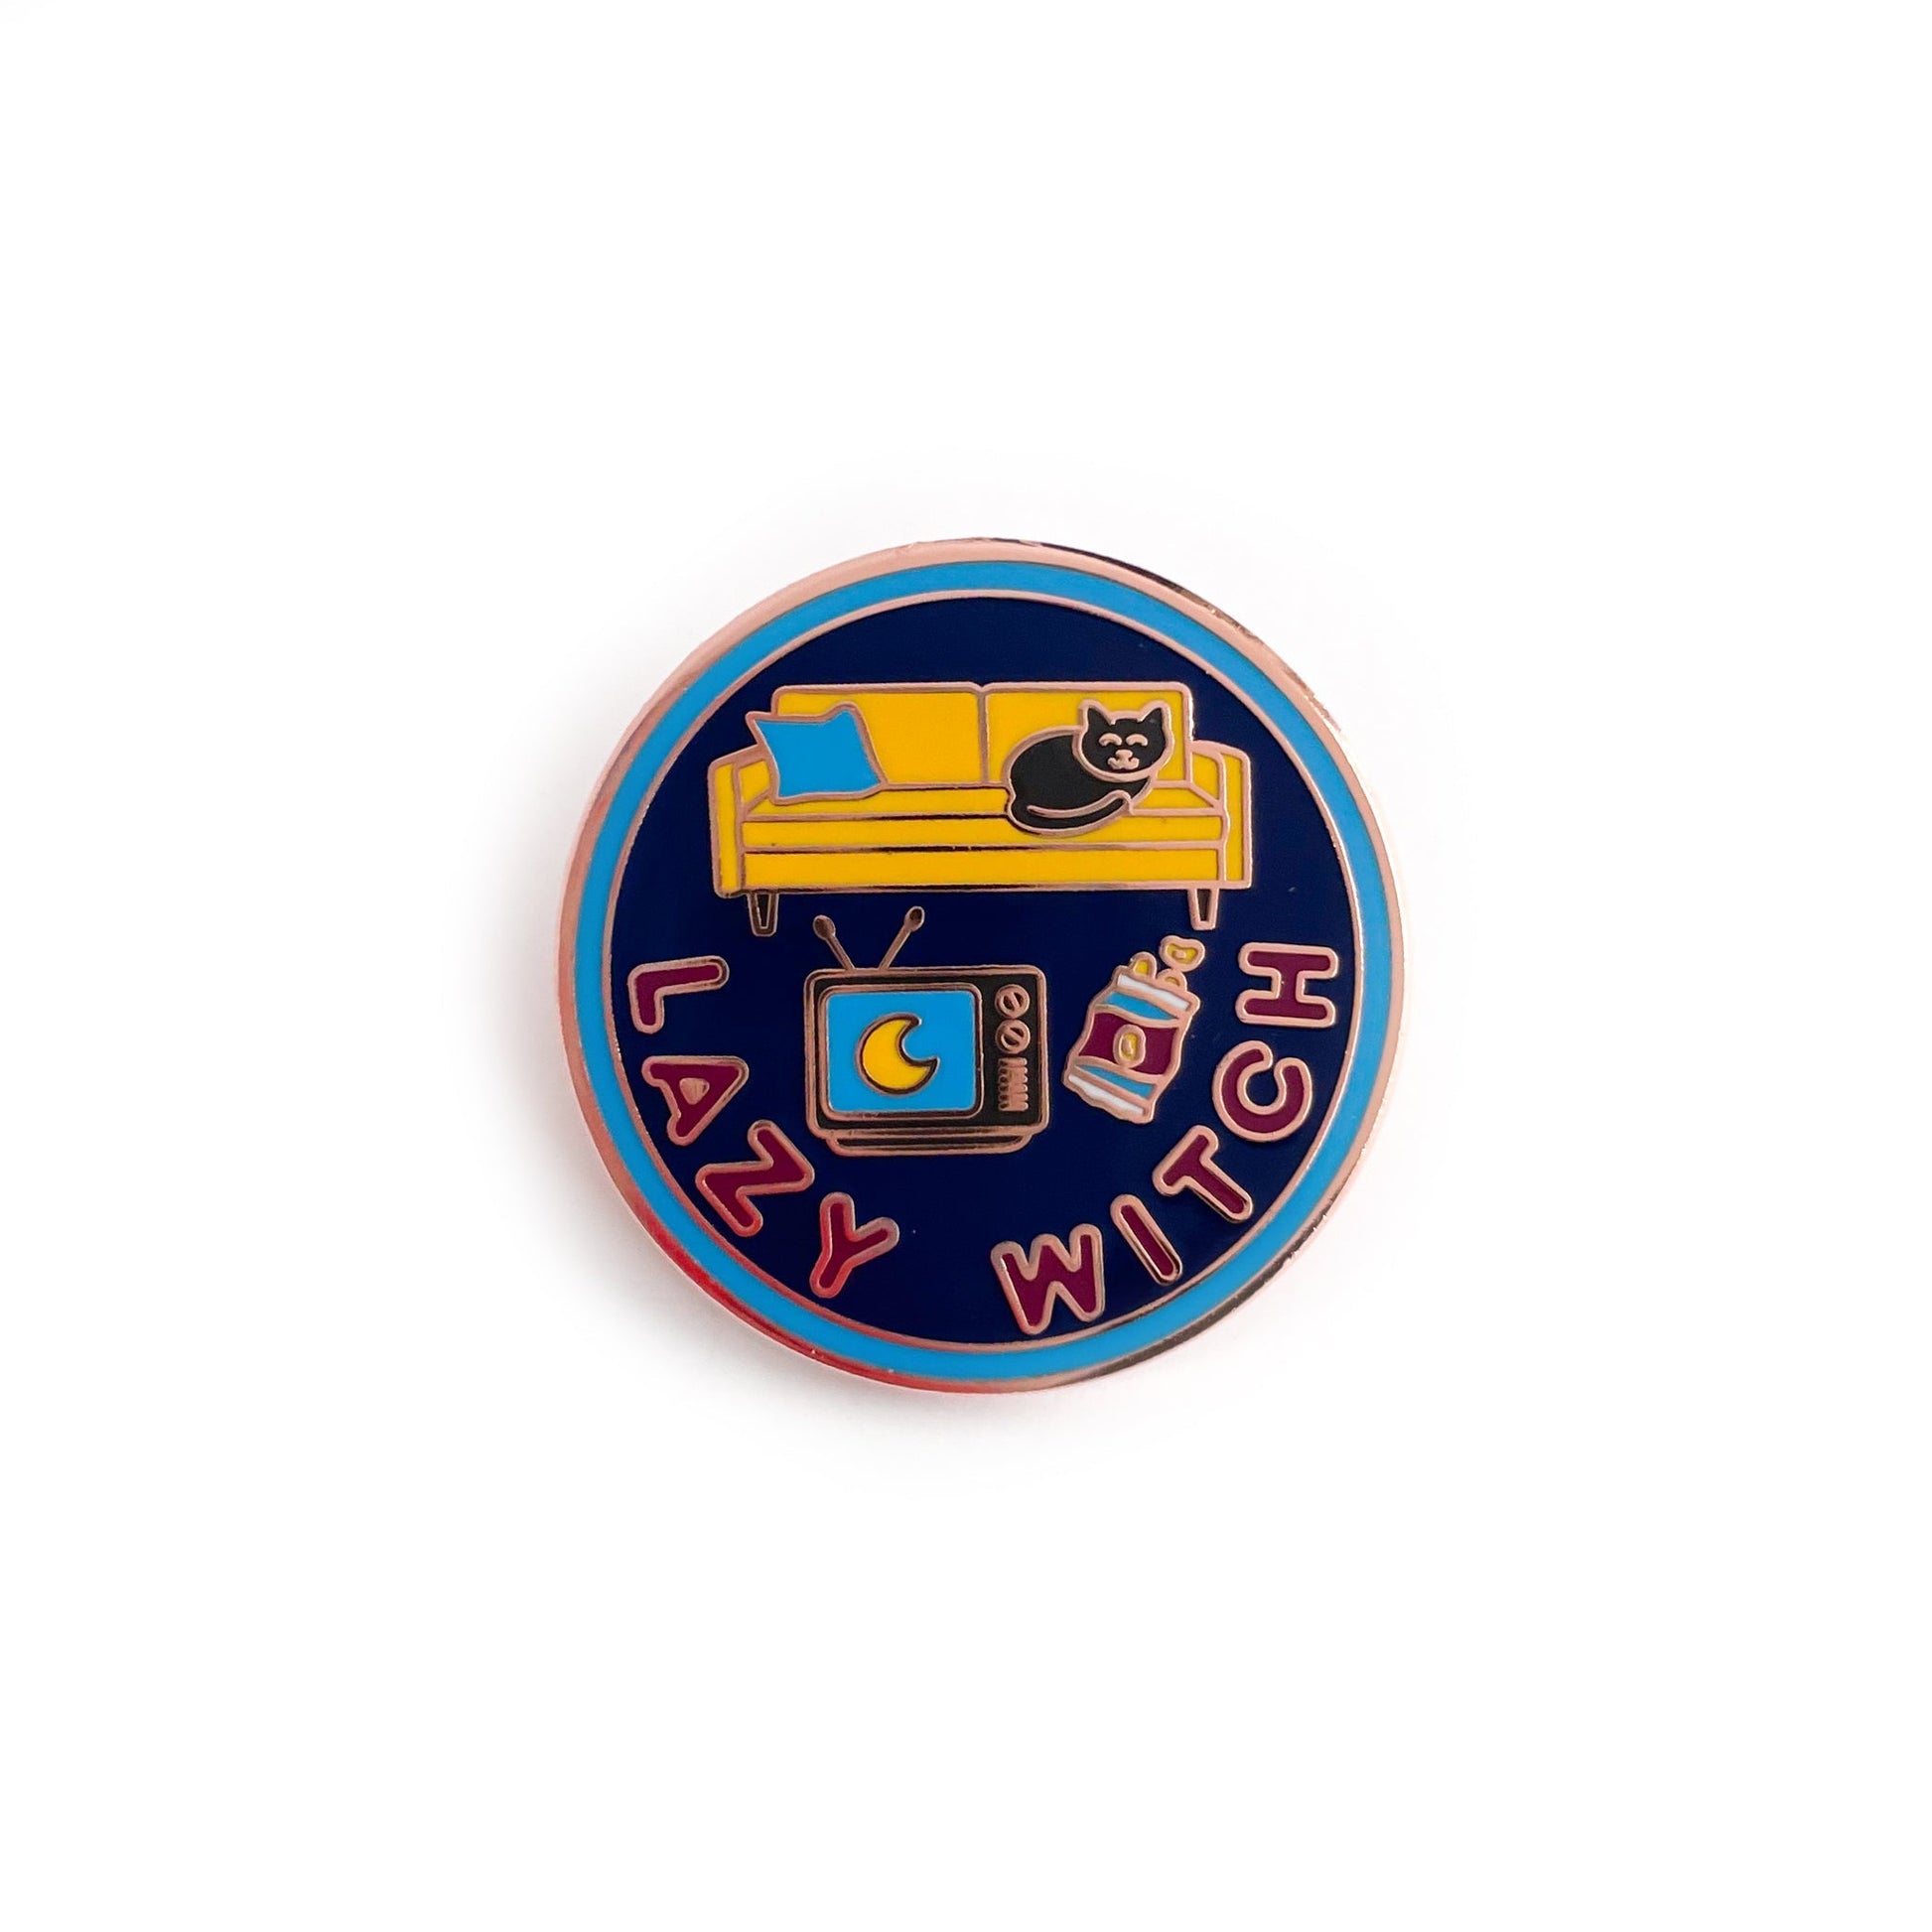 A circular enamel pin with a blue border, navy background, and maroon words that say "Lazy Witch". It has a vintage TV, bag of chips, a yellow couch and a black cat on the couch. 